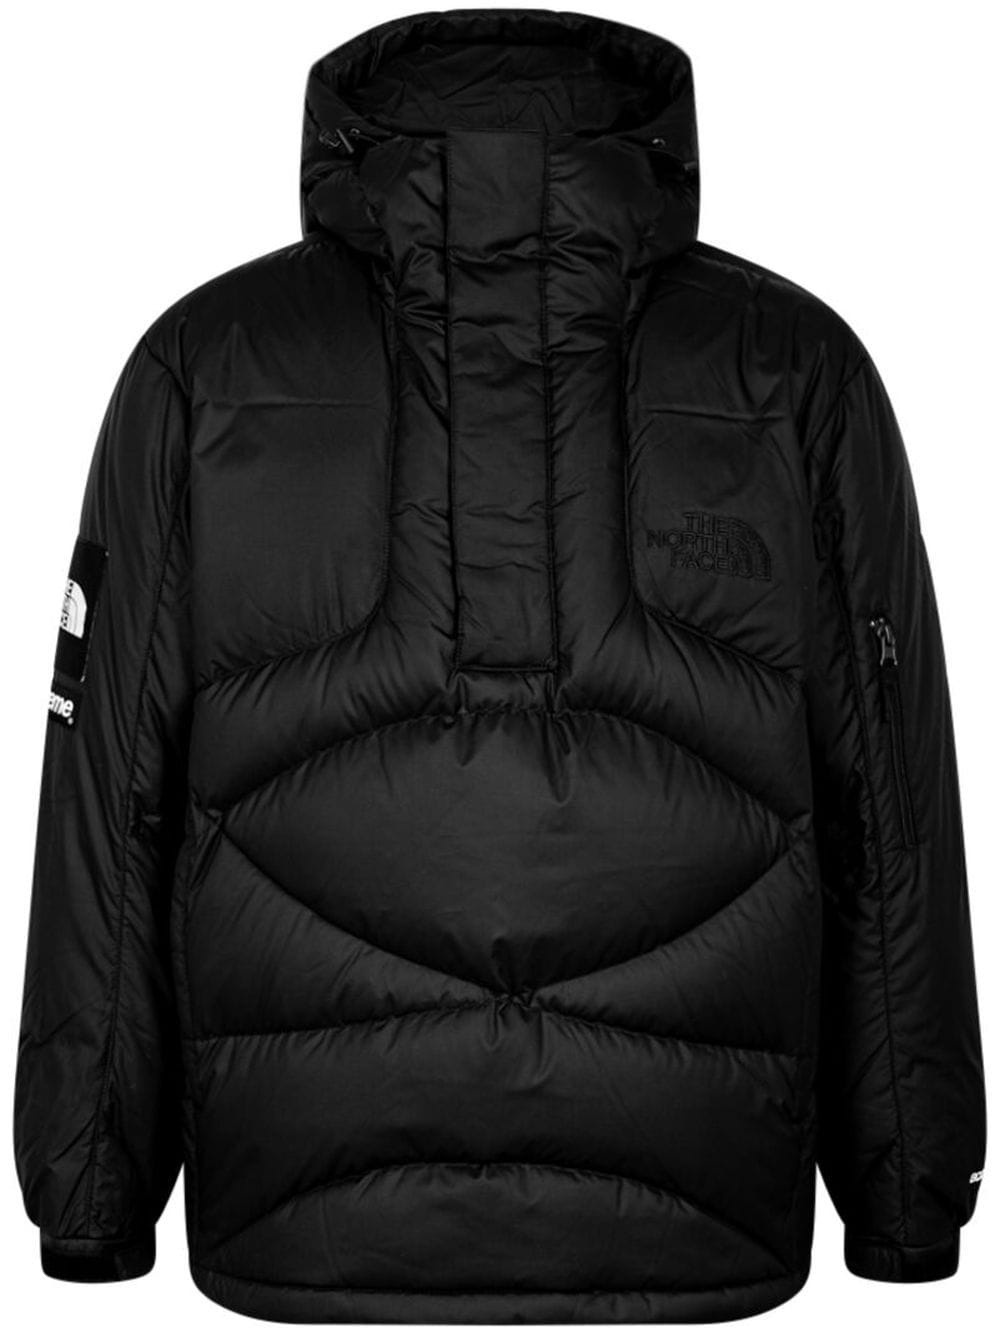 x The North Face 800-Fill pullover jacket - 1